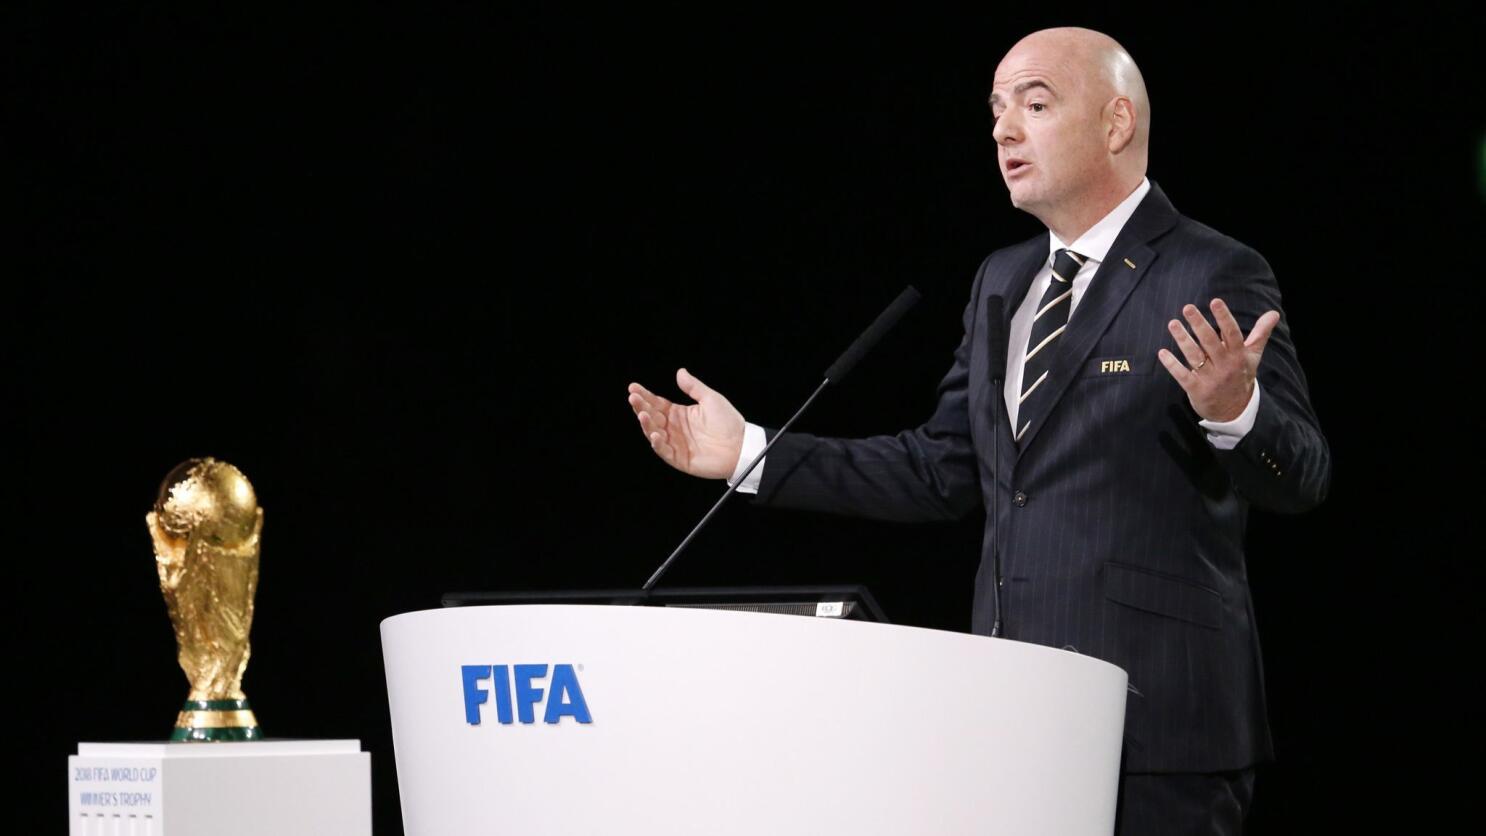 USA, Canada and Mexico win bid to host 2026 FIFA World Cup